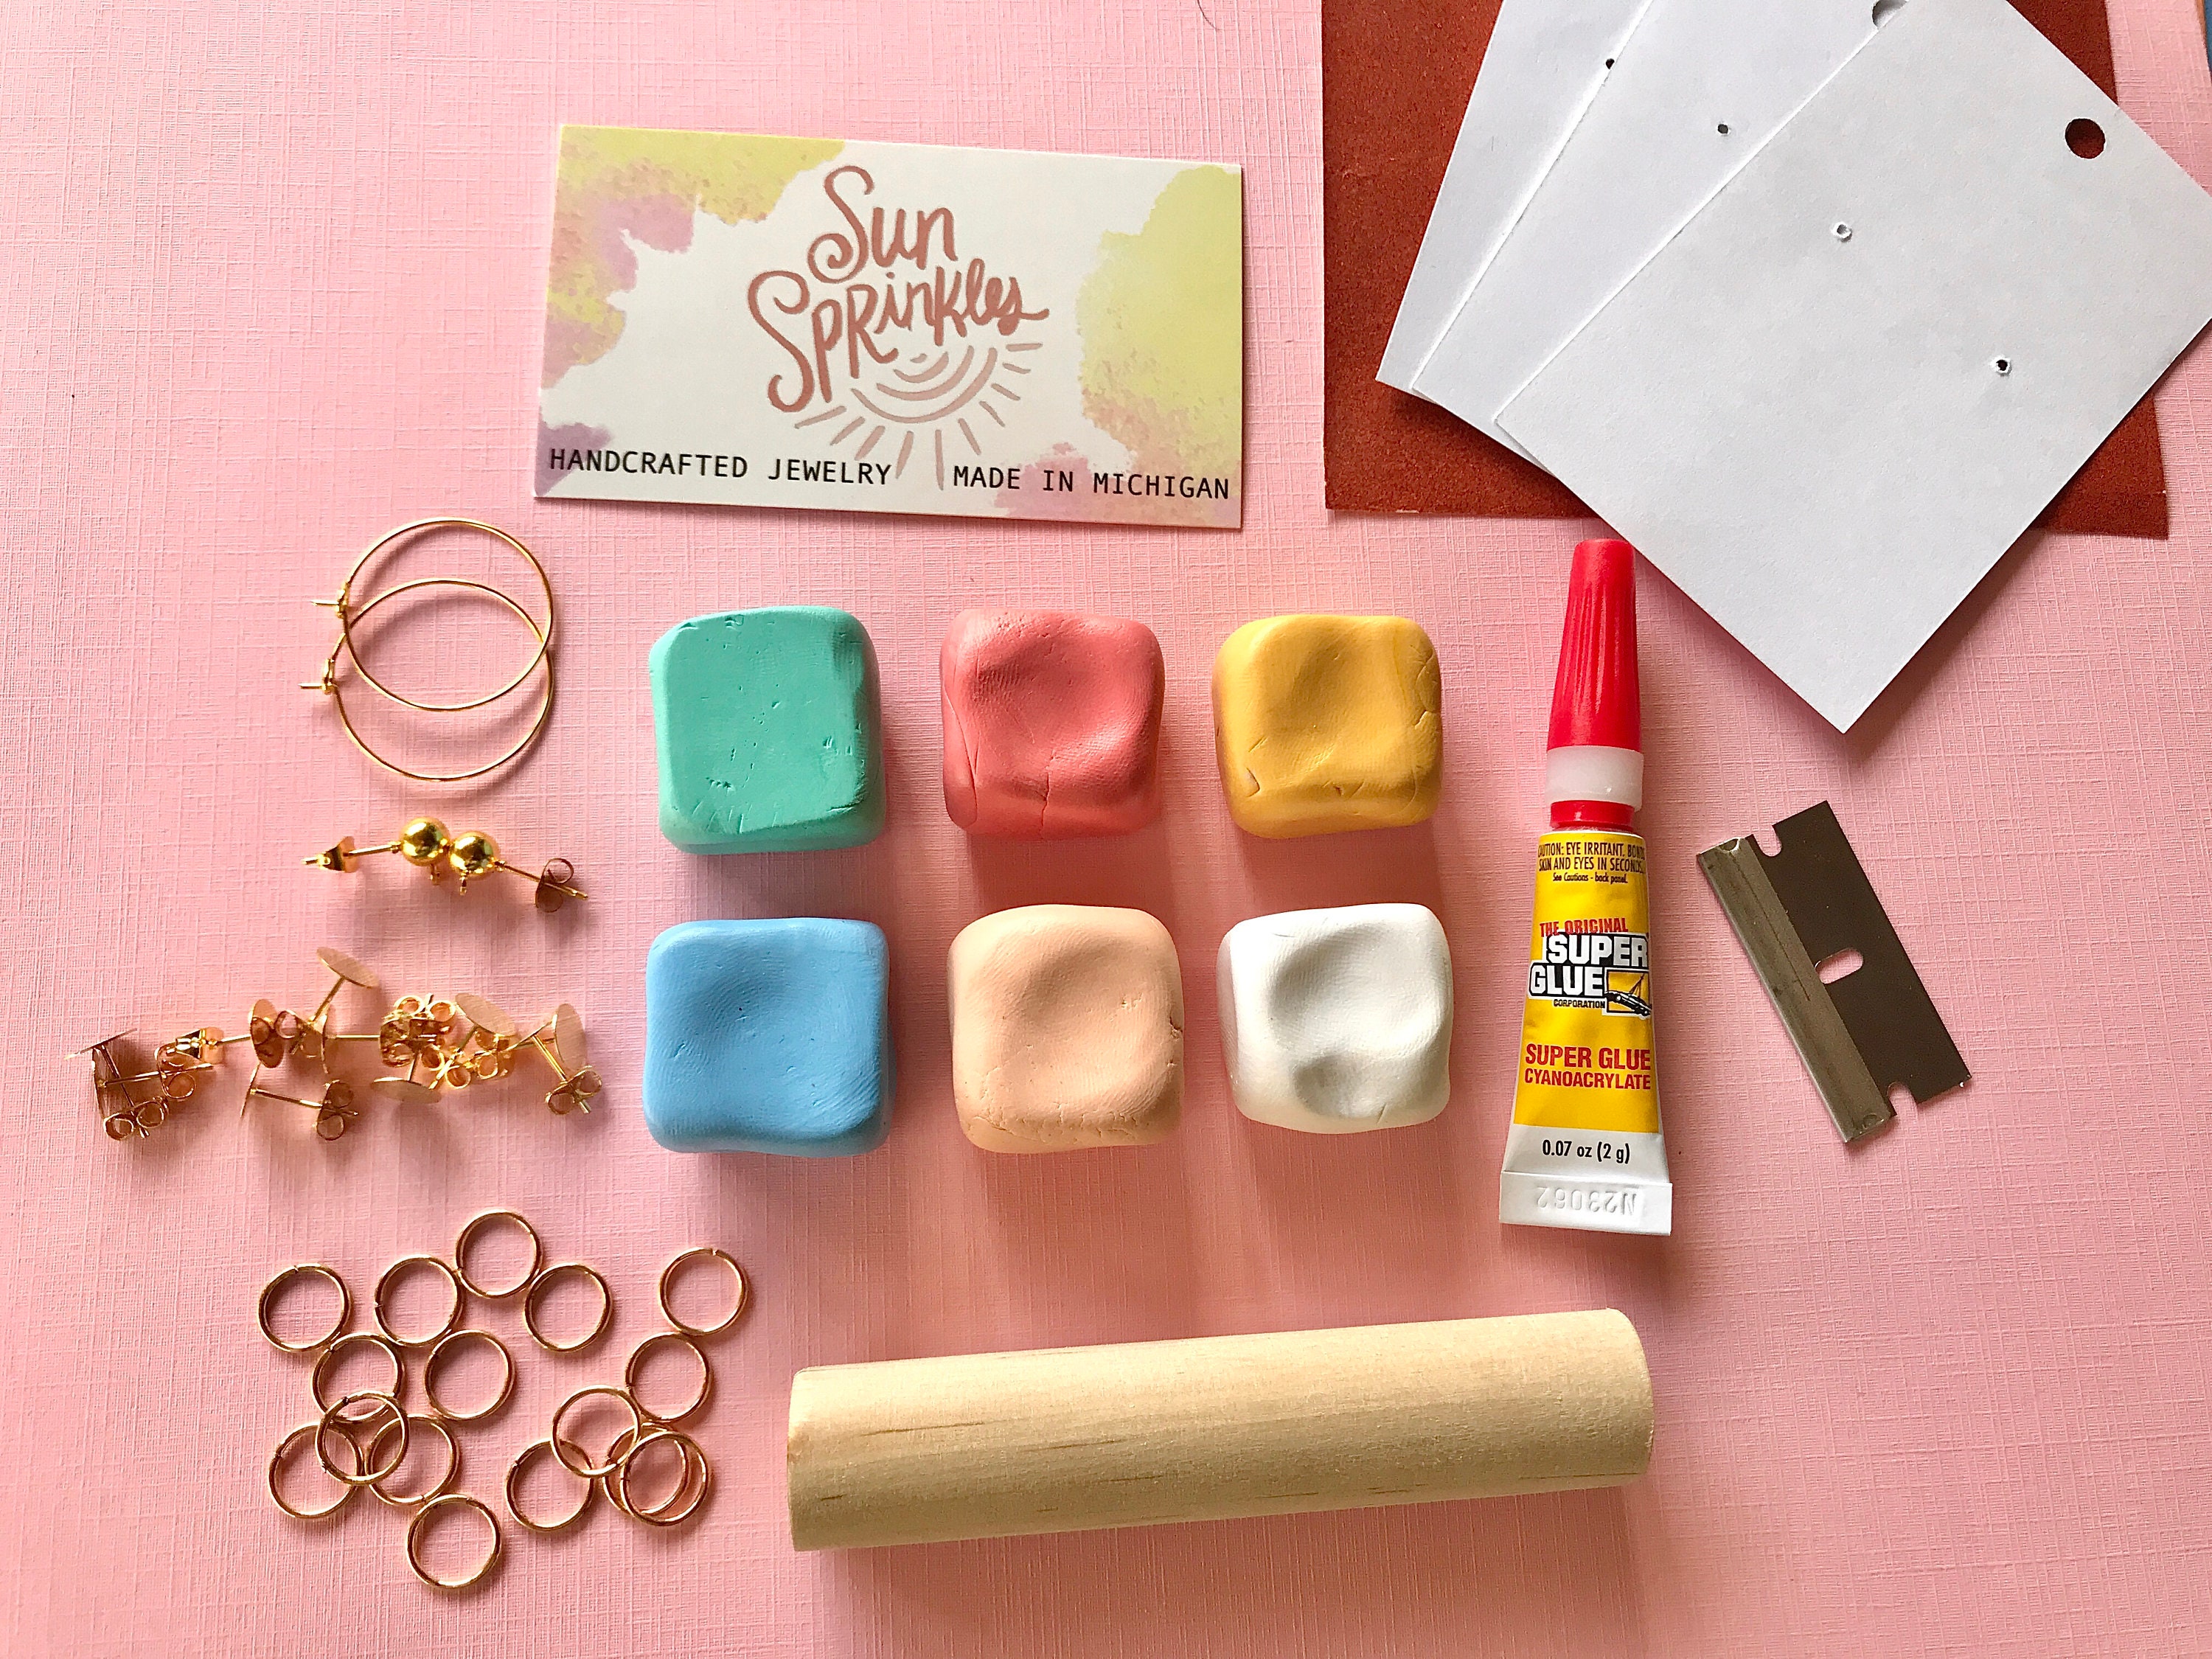 DIY Polymer Clay Earring Kit, Make Your Own Earrings Craft Kit, Beginners Jewellery  Making Set, Letterbox Crafting Gift 